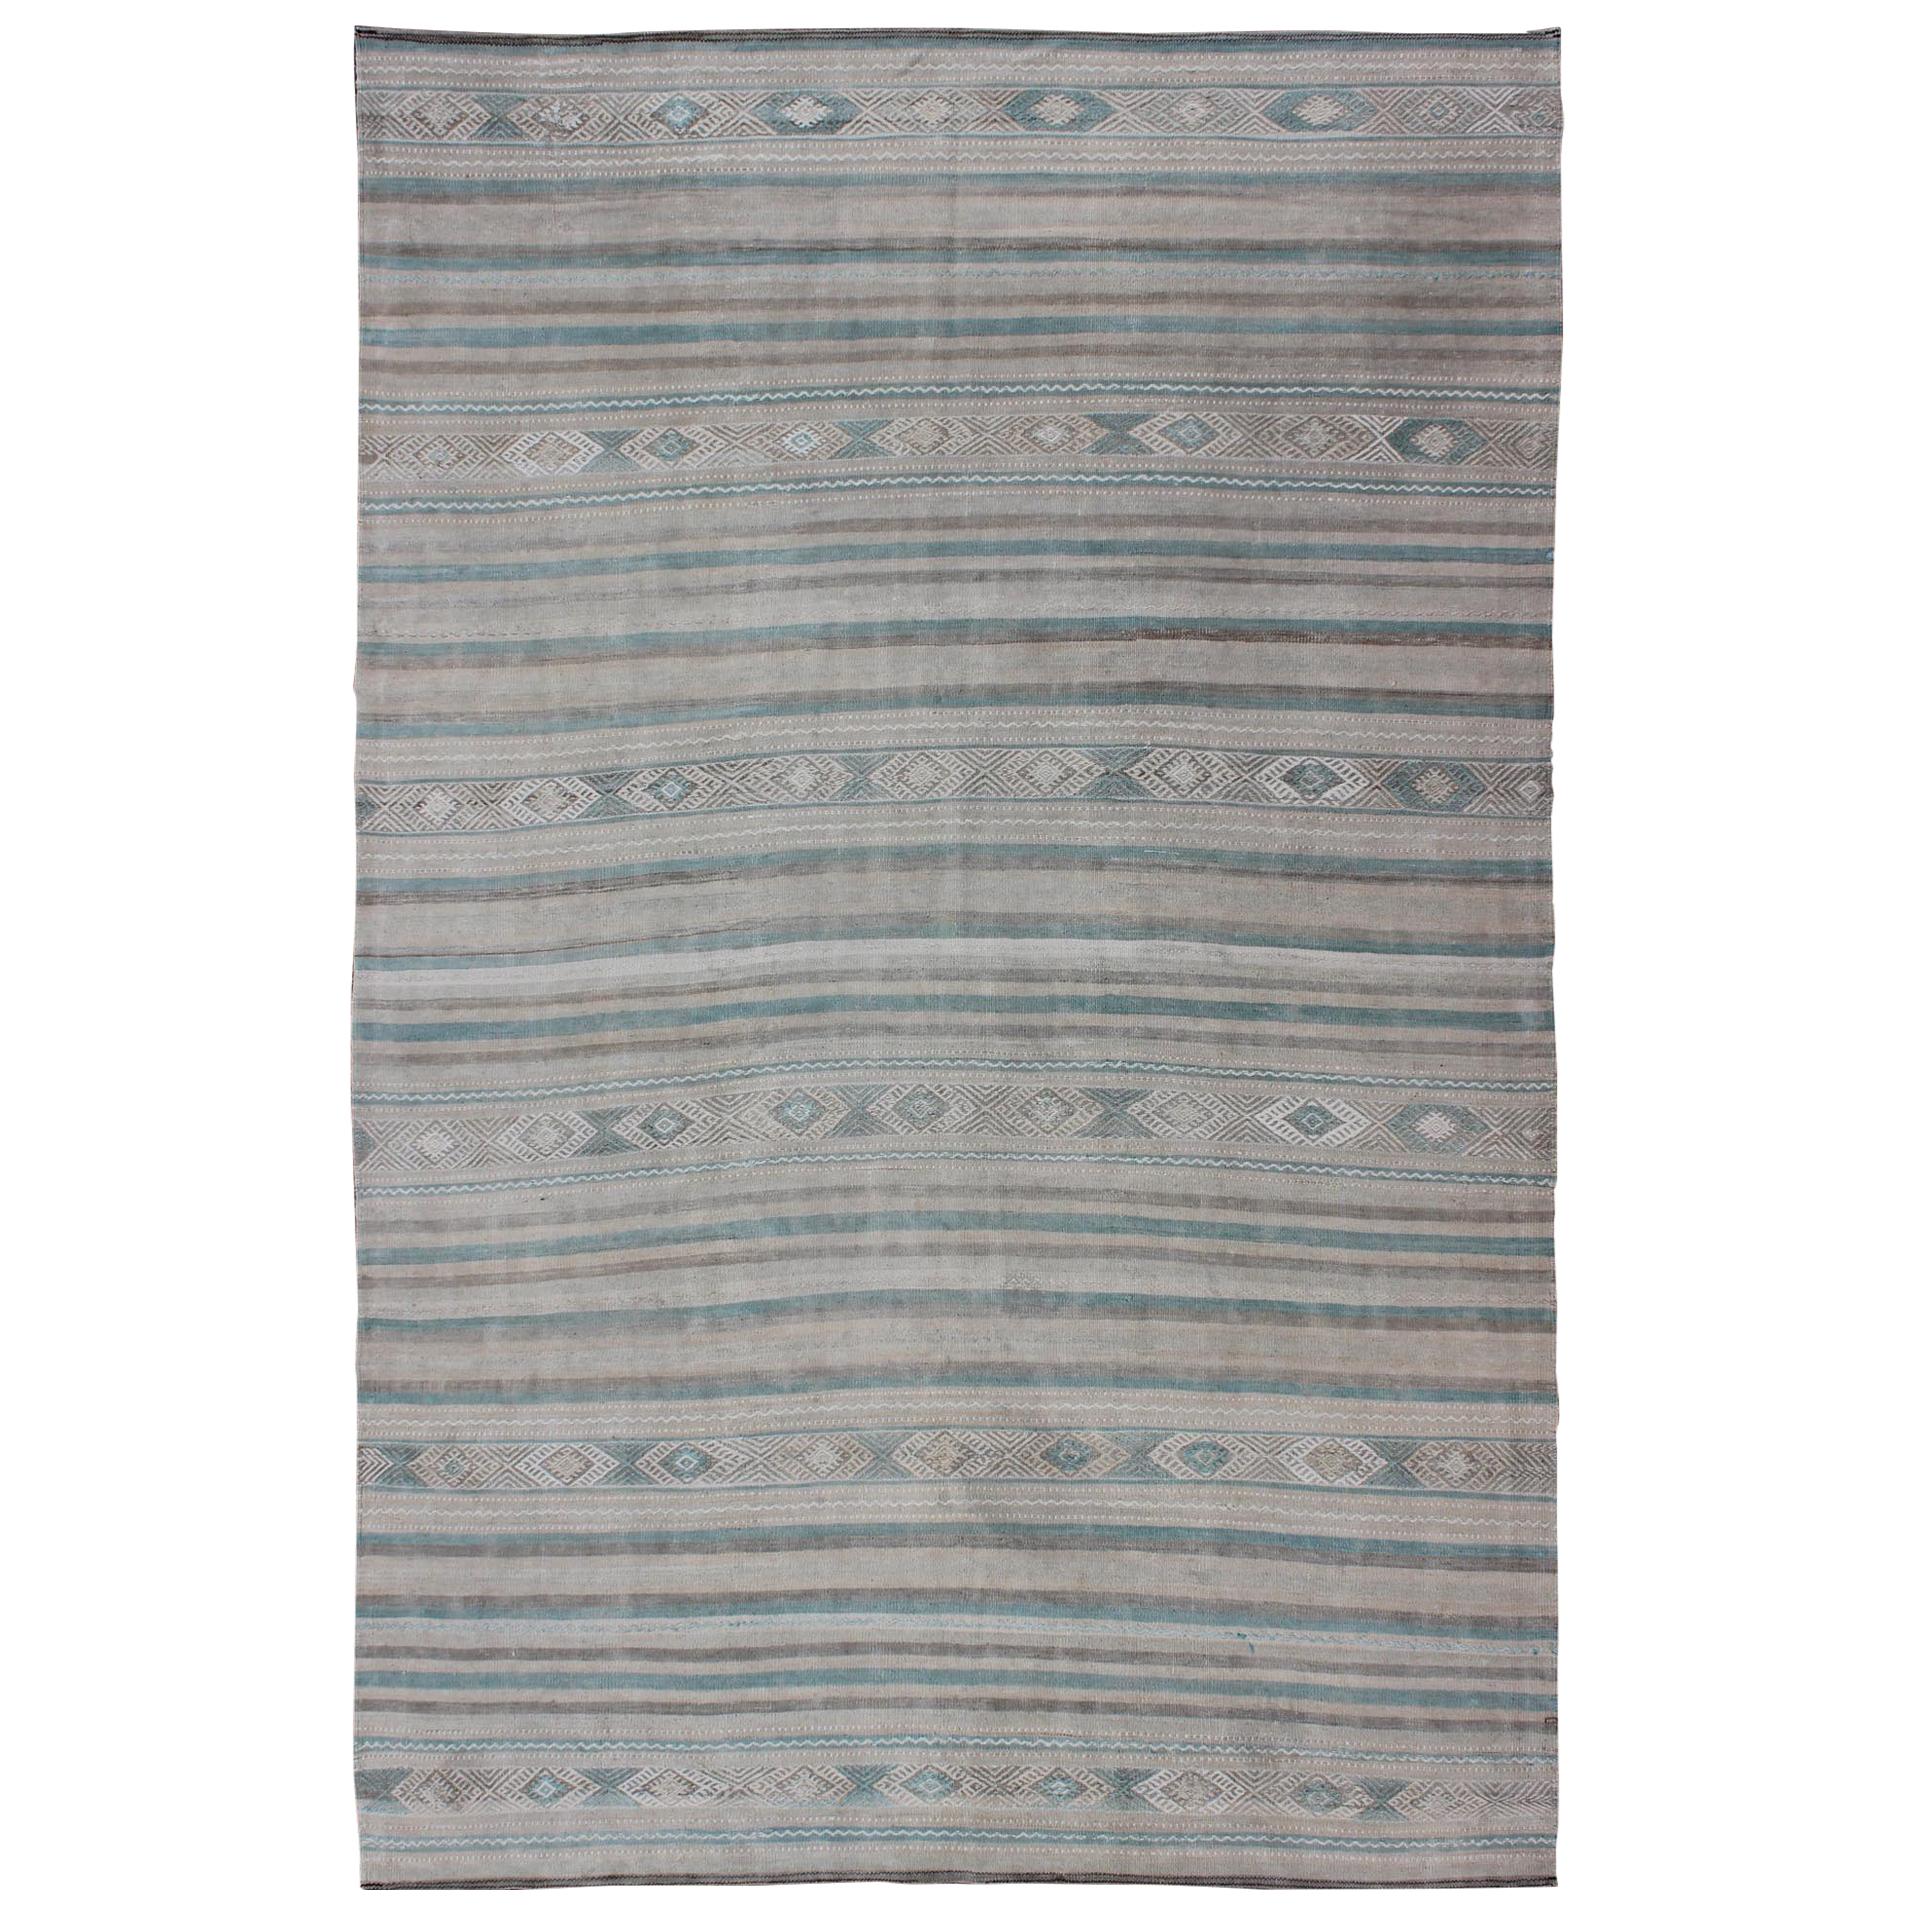 Gray, Blue Green, Taupe, and Camel Vintage Turkish Kilim with Geometric